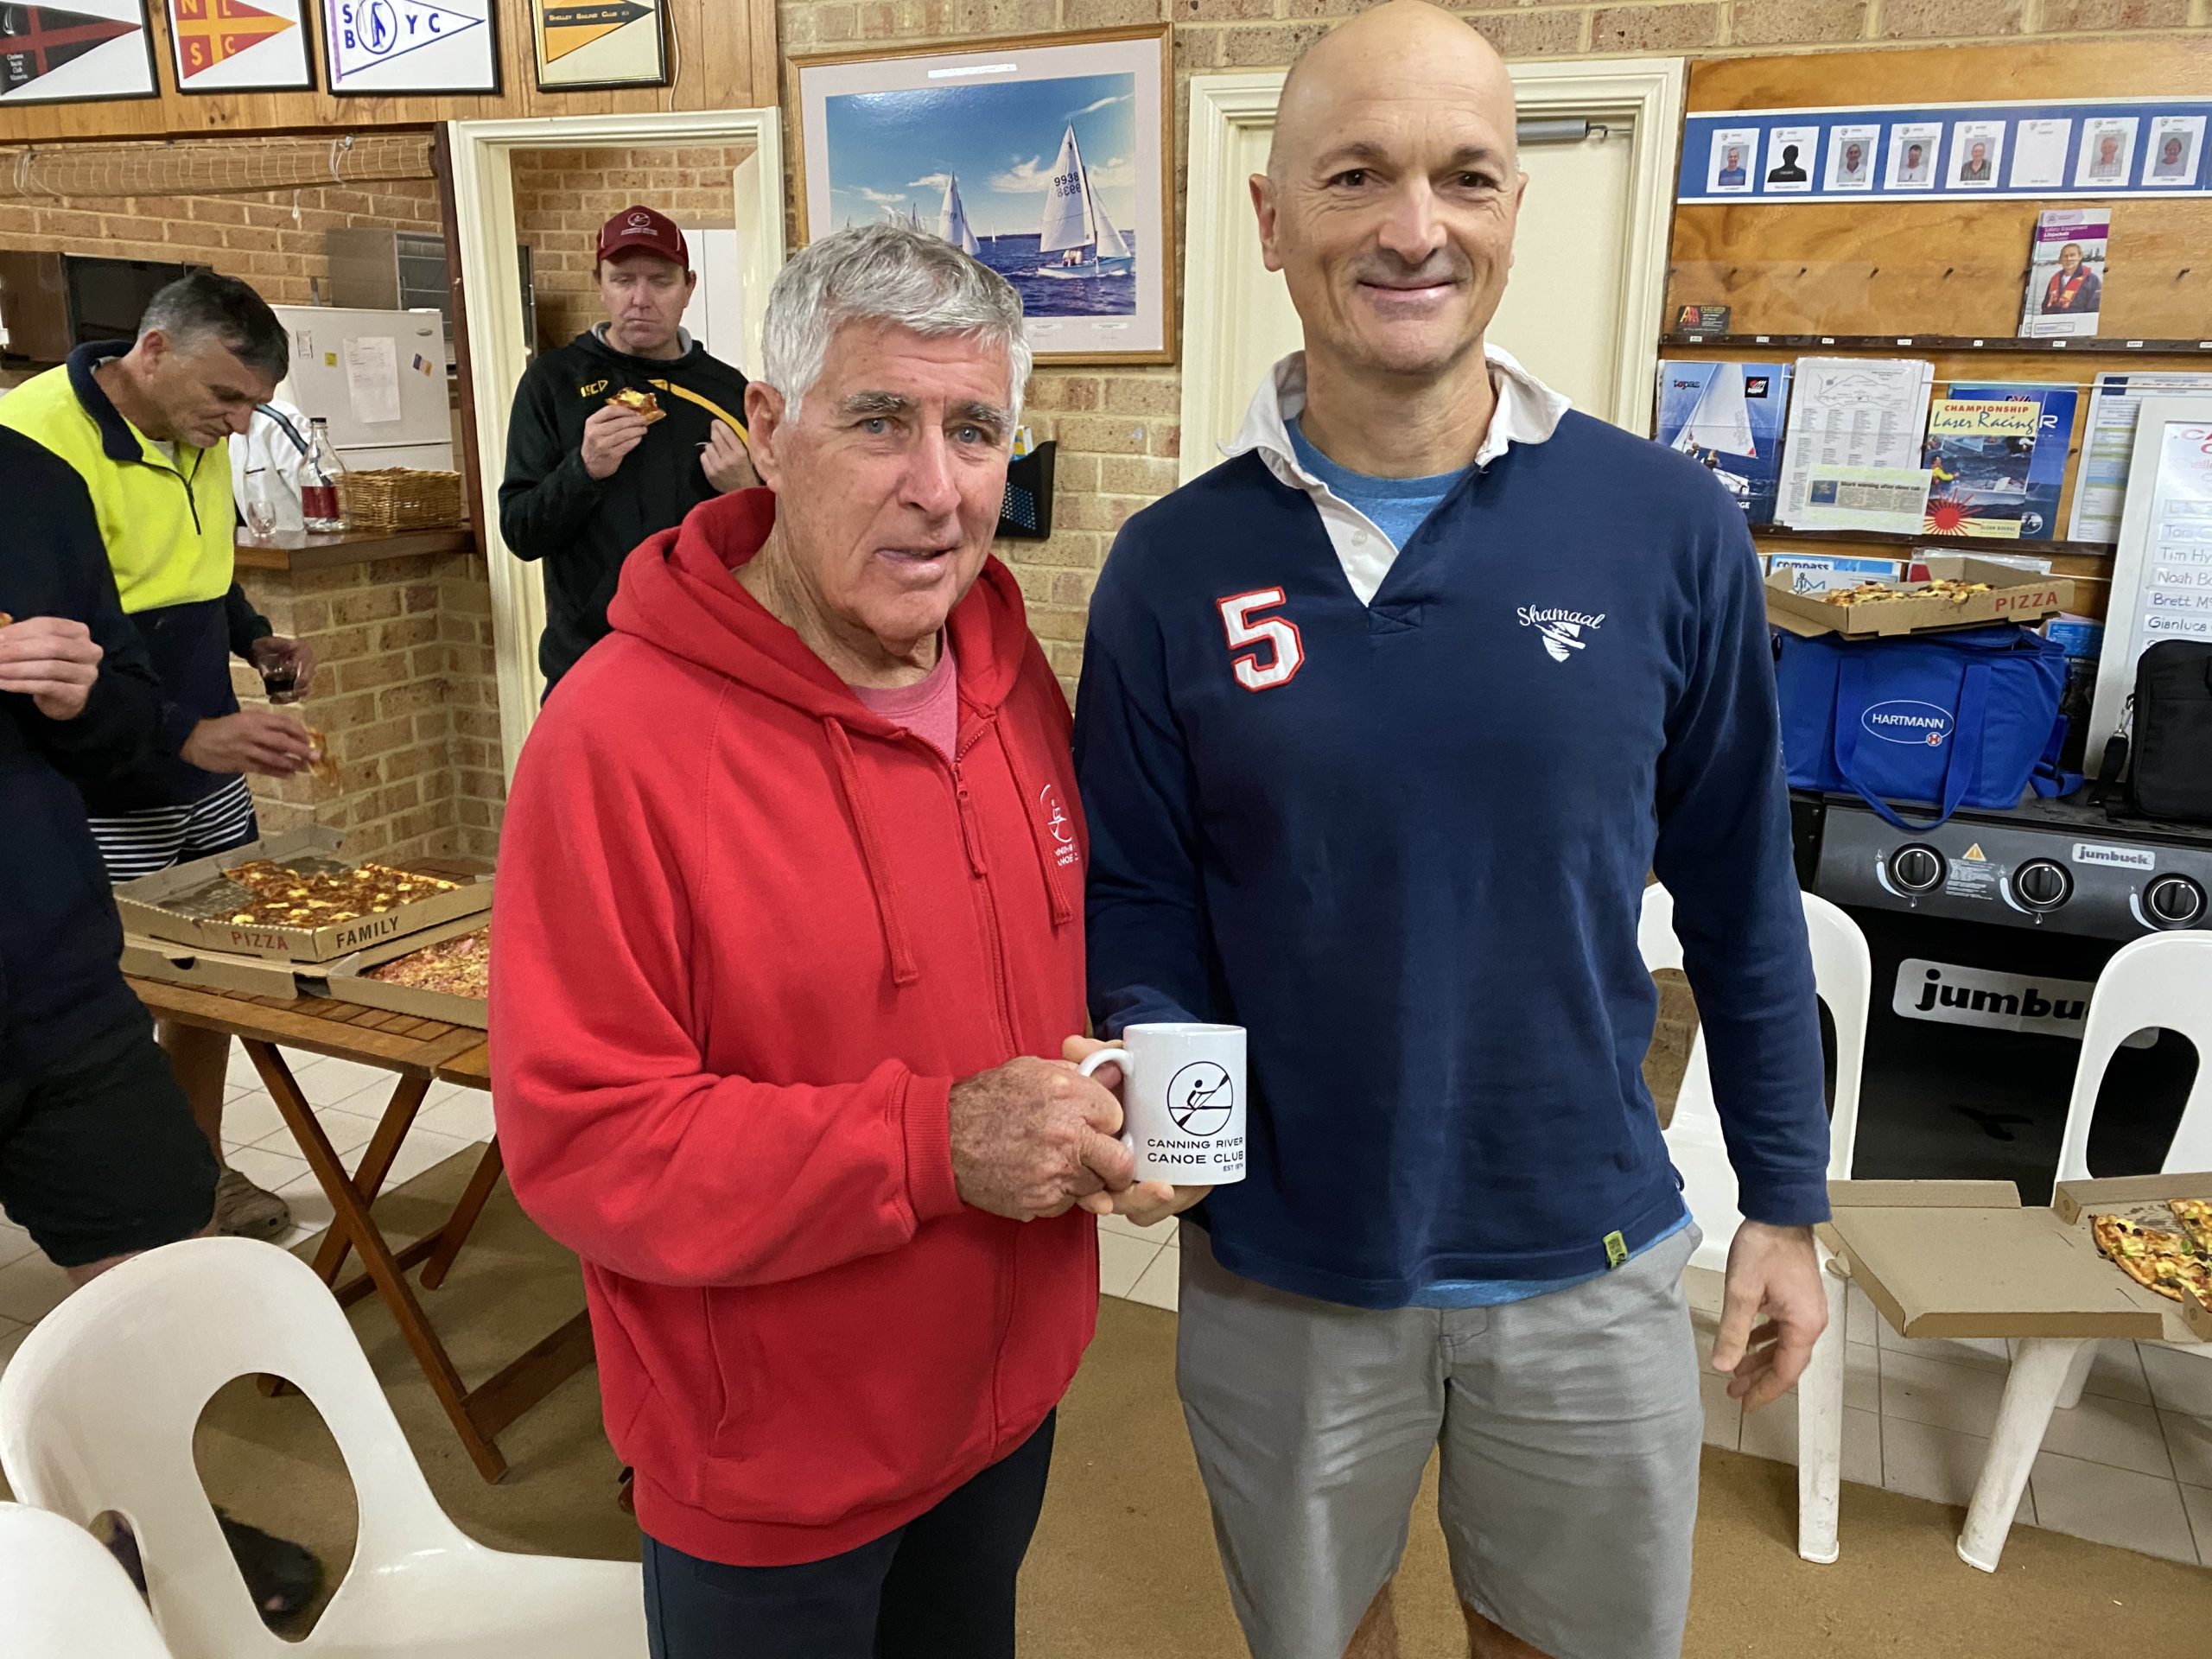 Tuesday 7th july 2020 : Tonight’s photos shows club member Joe Wilson presenting Carlo Cottino with a movie voucher.